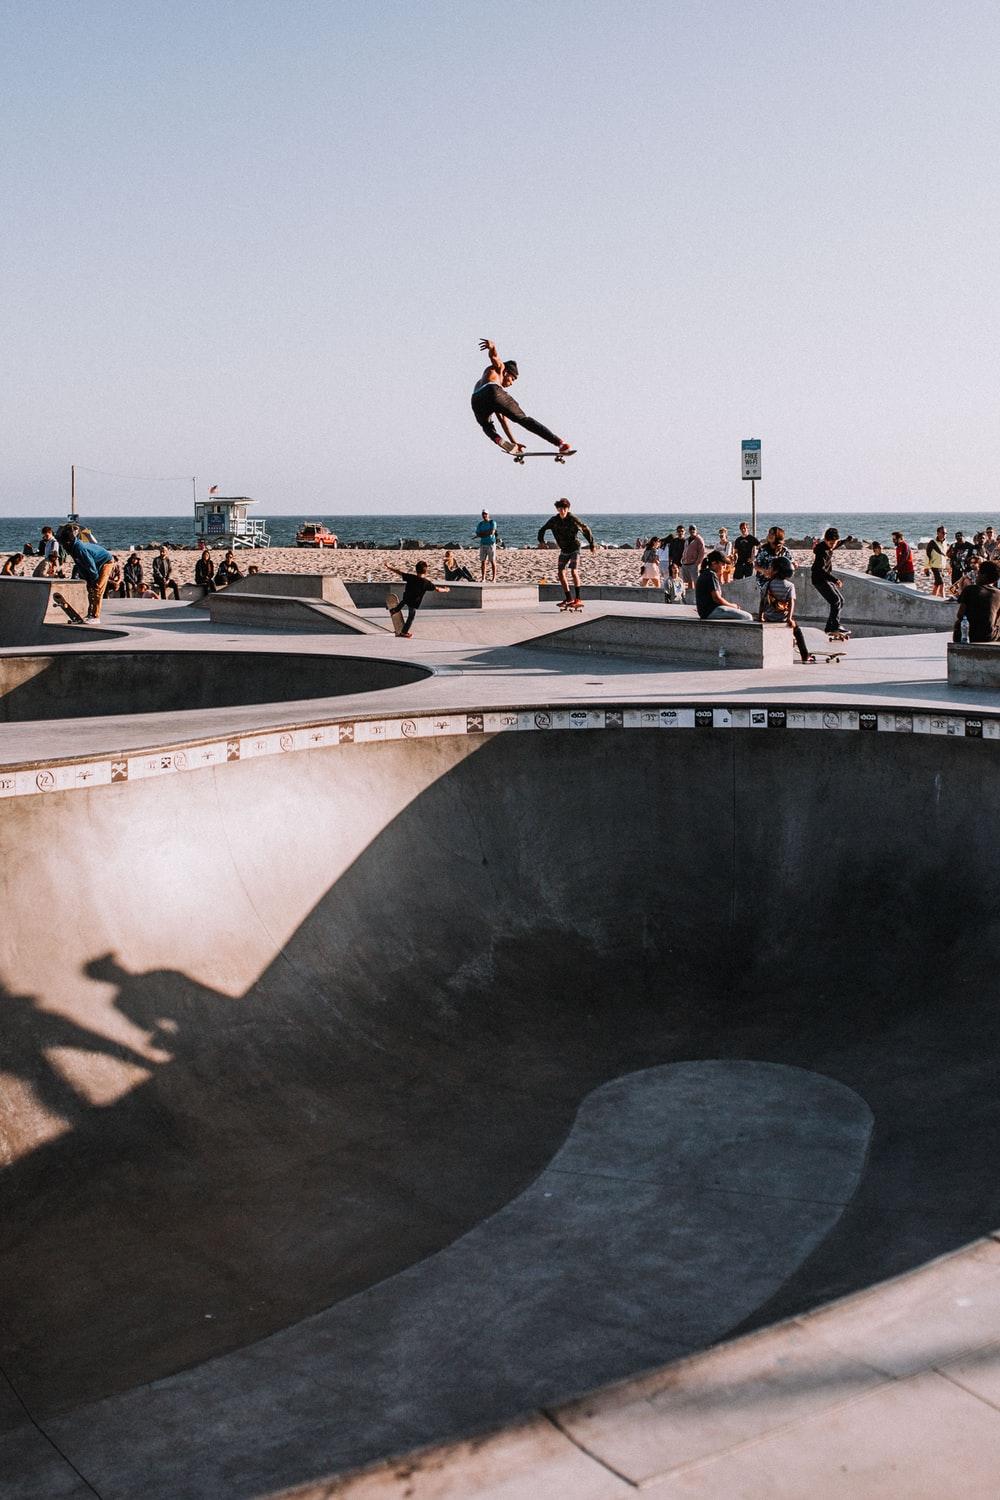 Venice Beach Skate Park Picture. Download Free Image